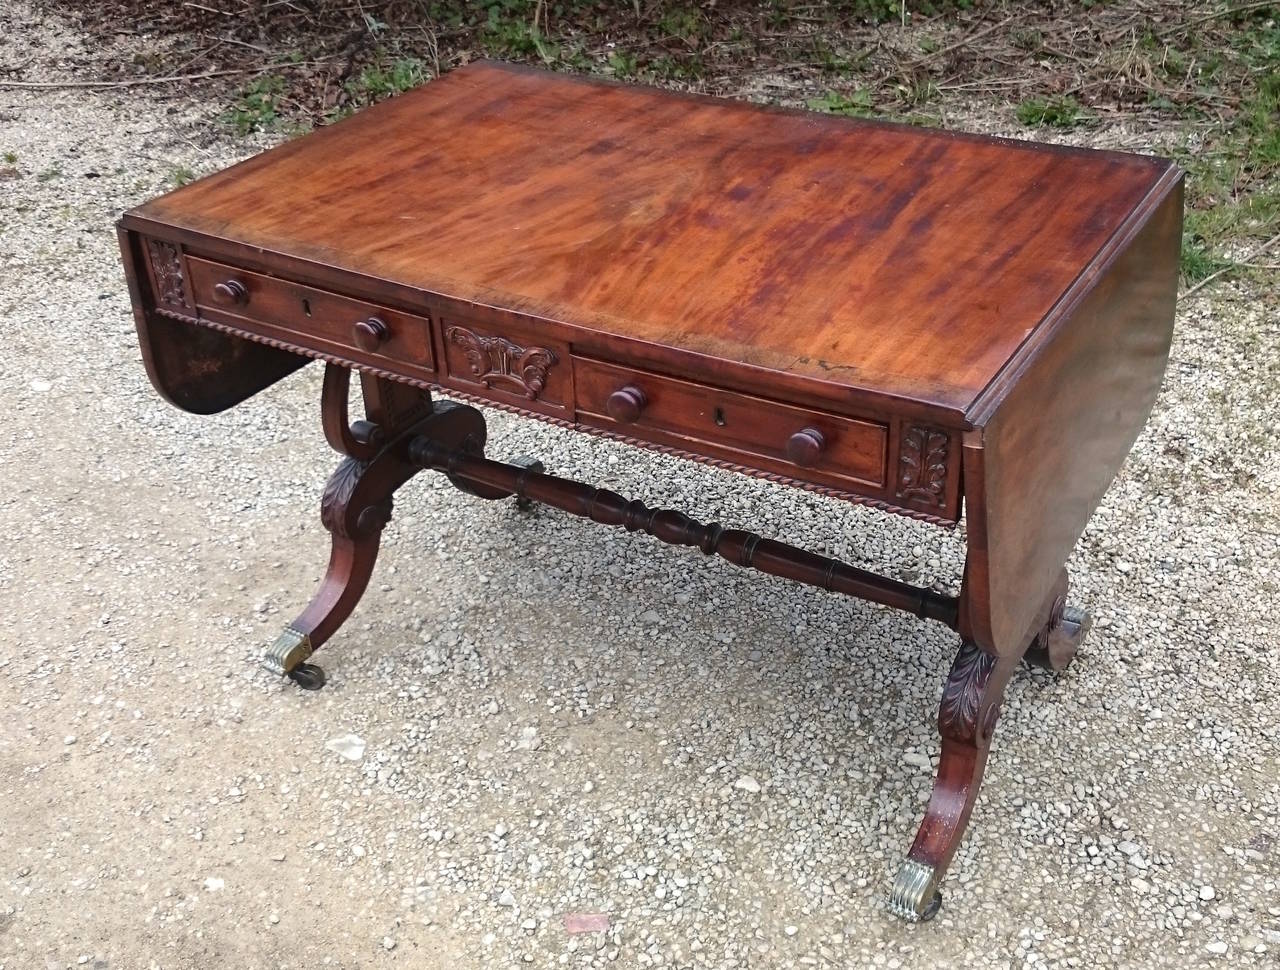 Antique sofa table made of finely figured mahogany with inlay and carving. This table stands on end supports with an elegant version of the Regency knee. The turned stretcher is thin and the carving is detailed. There are drawers one side and false